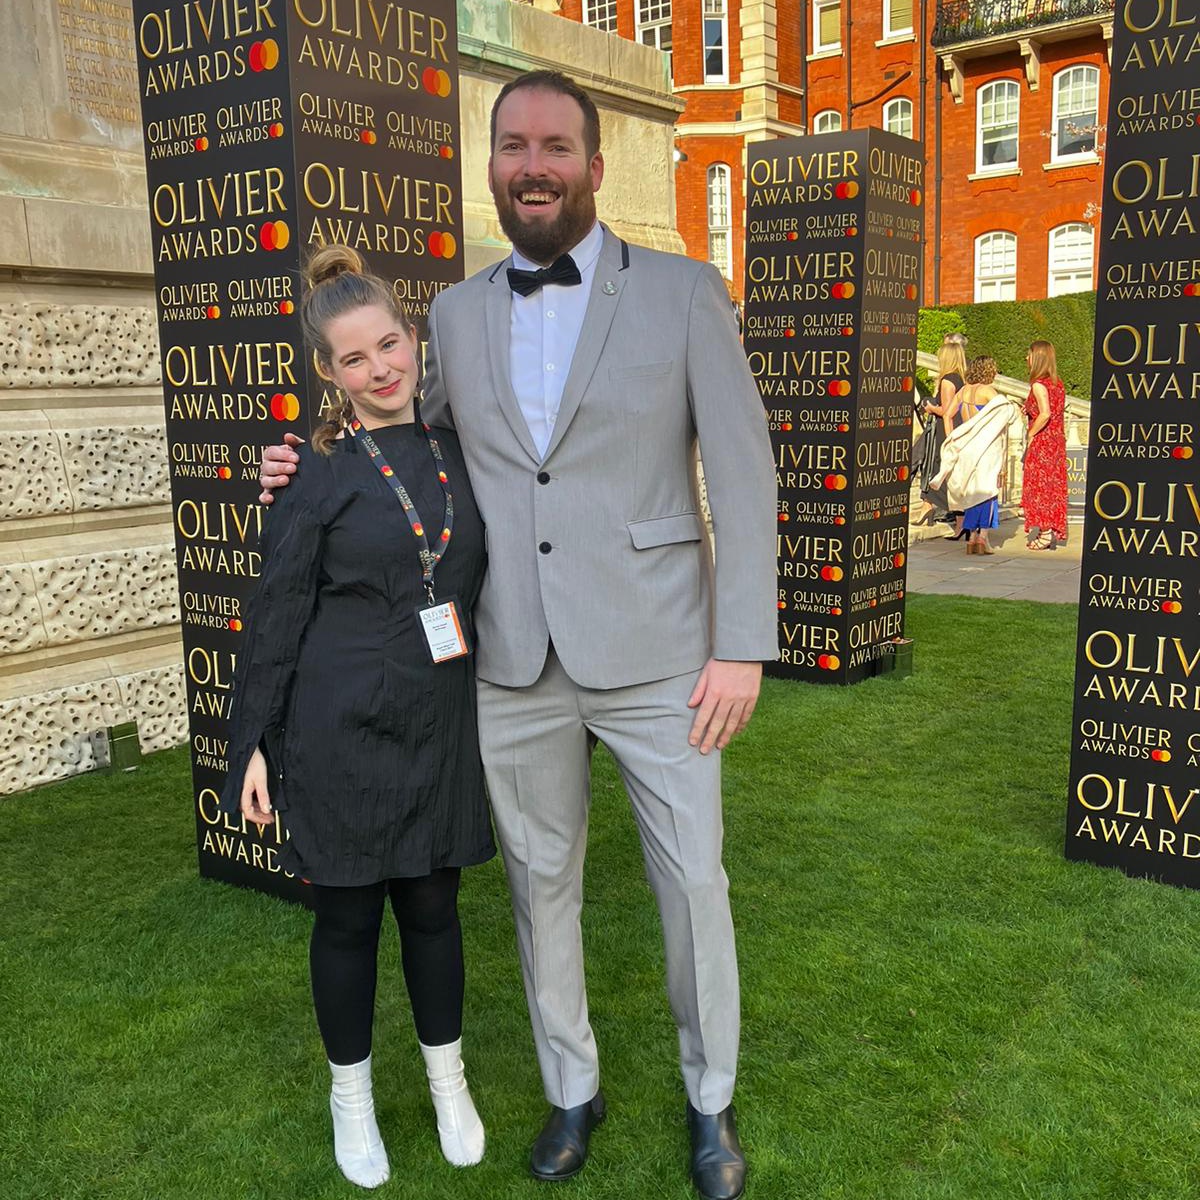 Just a lil Sheffield boy celebrating #StandingAtTheSkysEdge last night at the Olivier Awards - there's an army of people @CrucibleTheatre who weren't there, but this show belongs to them. #MadeInSheffield